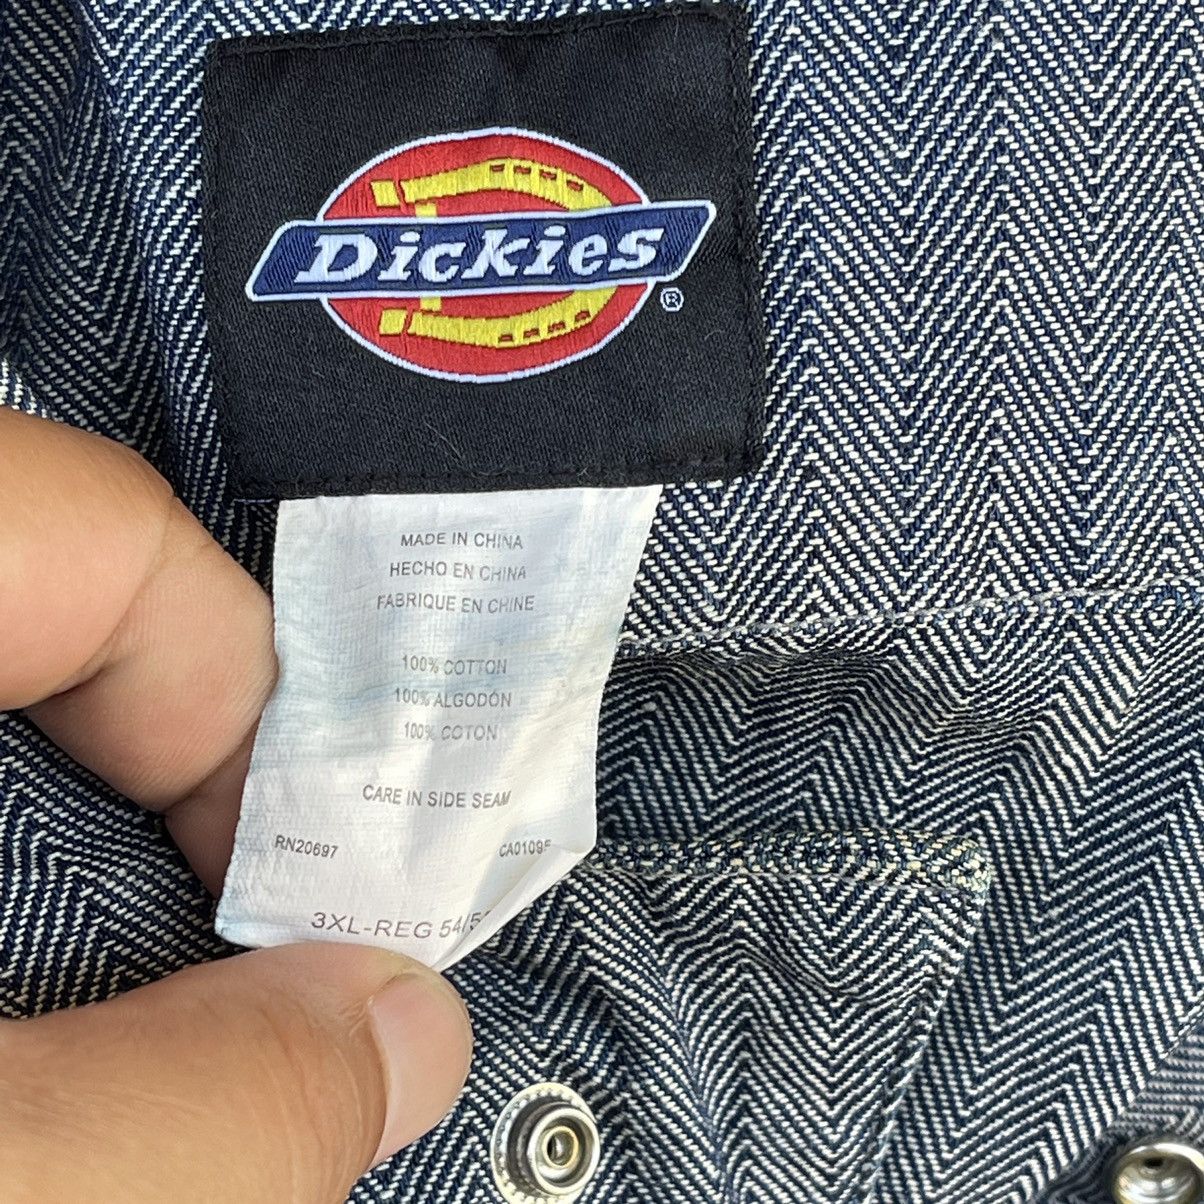 🔥Best Offer🔥 Vintage 90s Dickies Coverall - 12